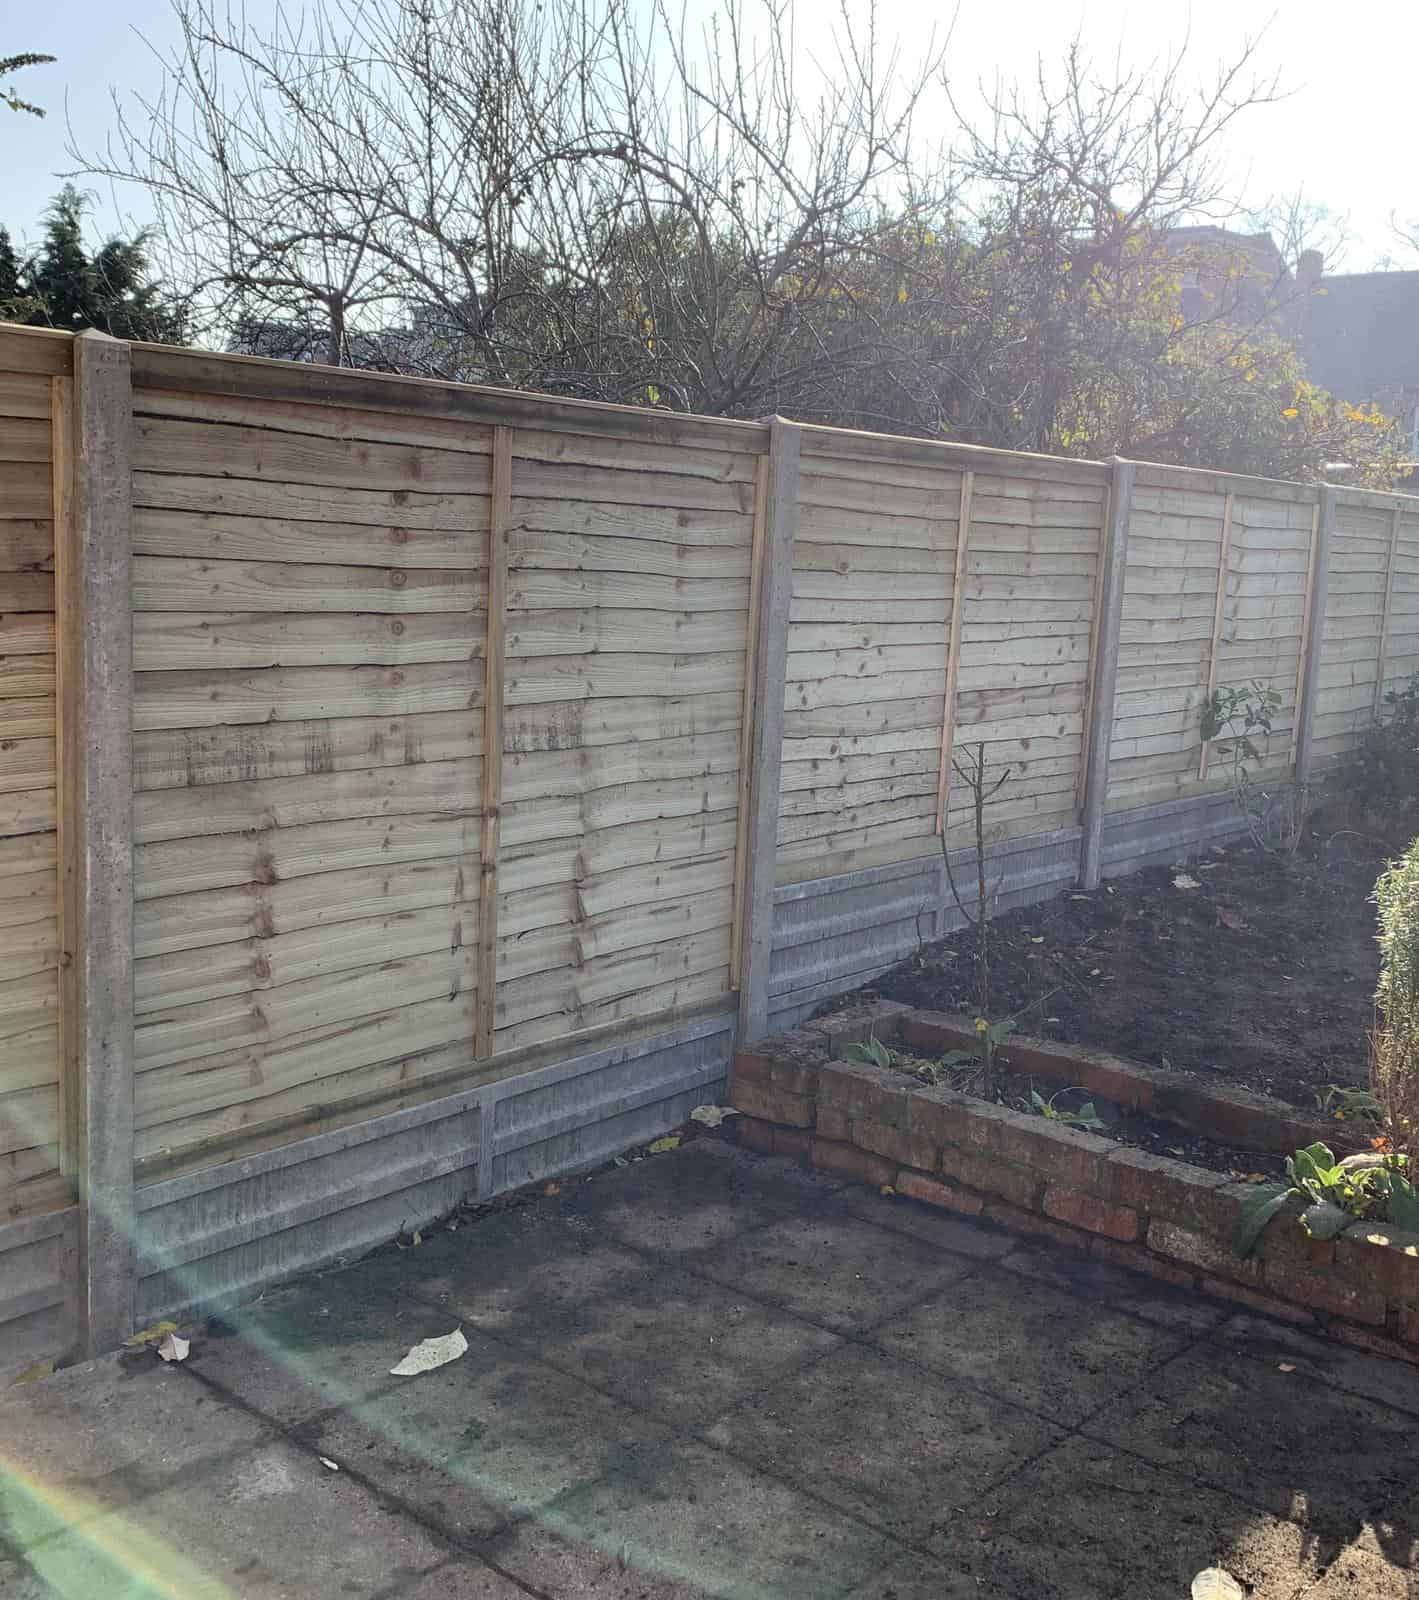 New fence built for a customer in Reading